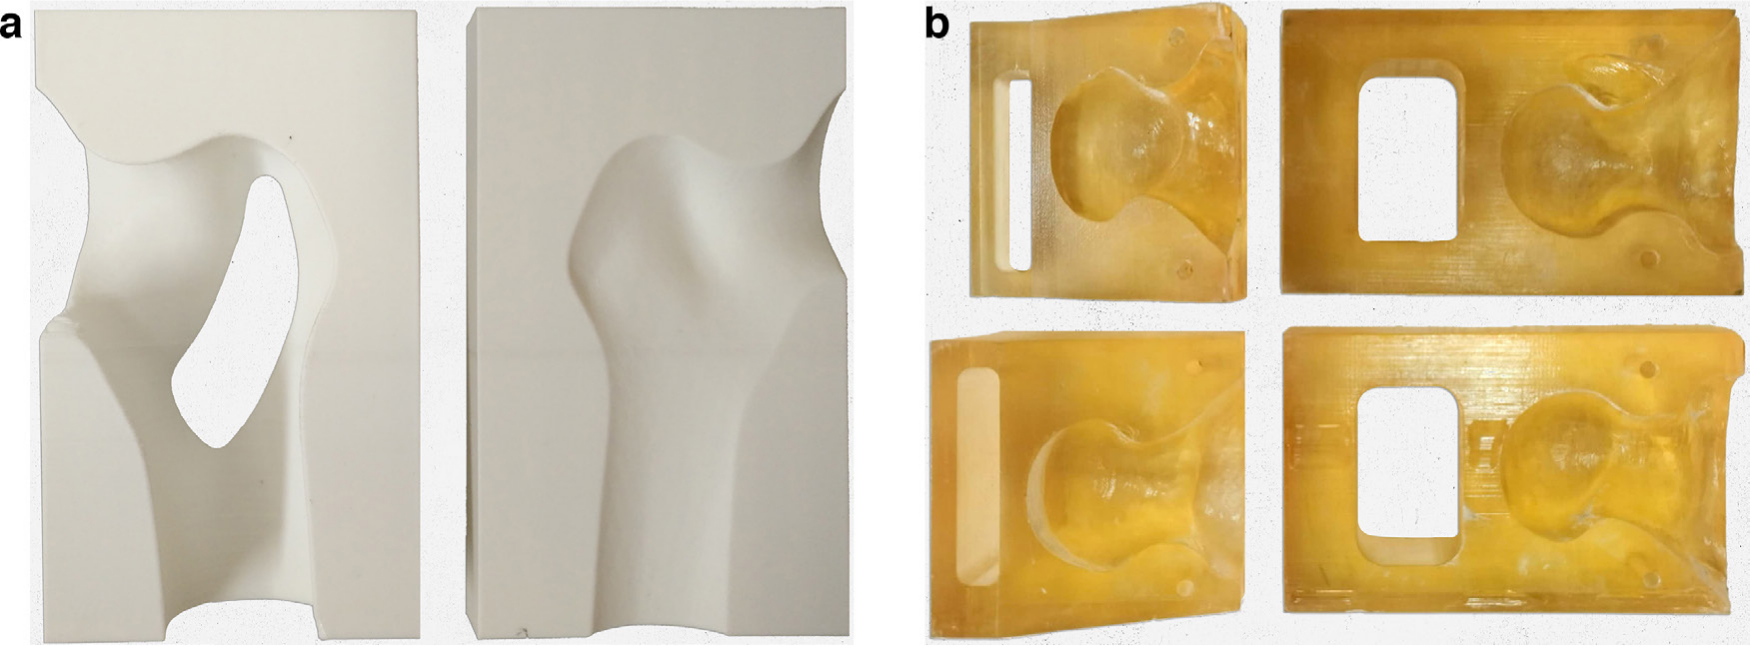 Fig. 2 
            a) 3D-printed nailing target of the cephalomedullary nail. b) 3D-printed osteotomy guide of AO/OTA type 31-A2.3 intertrochanteric fracture.
          